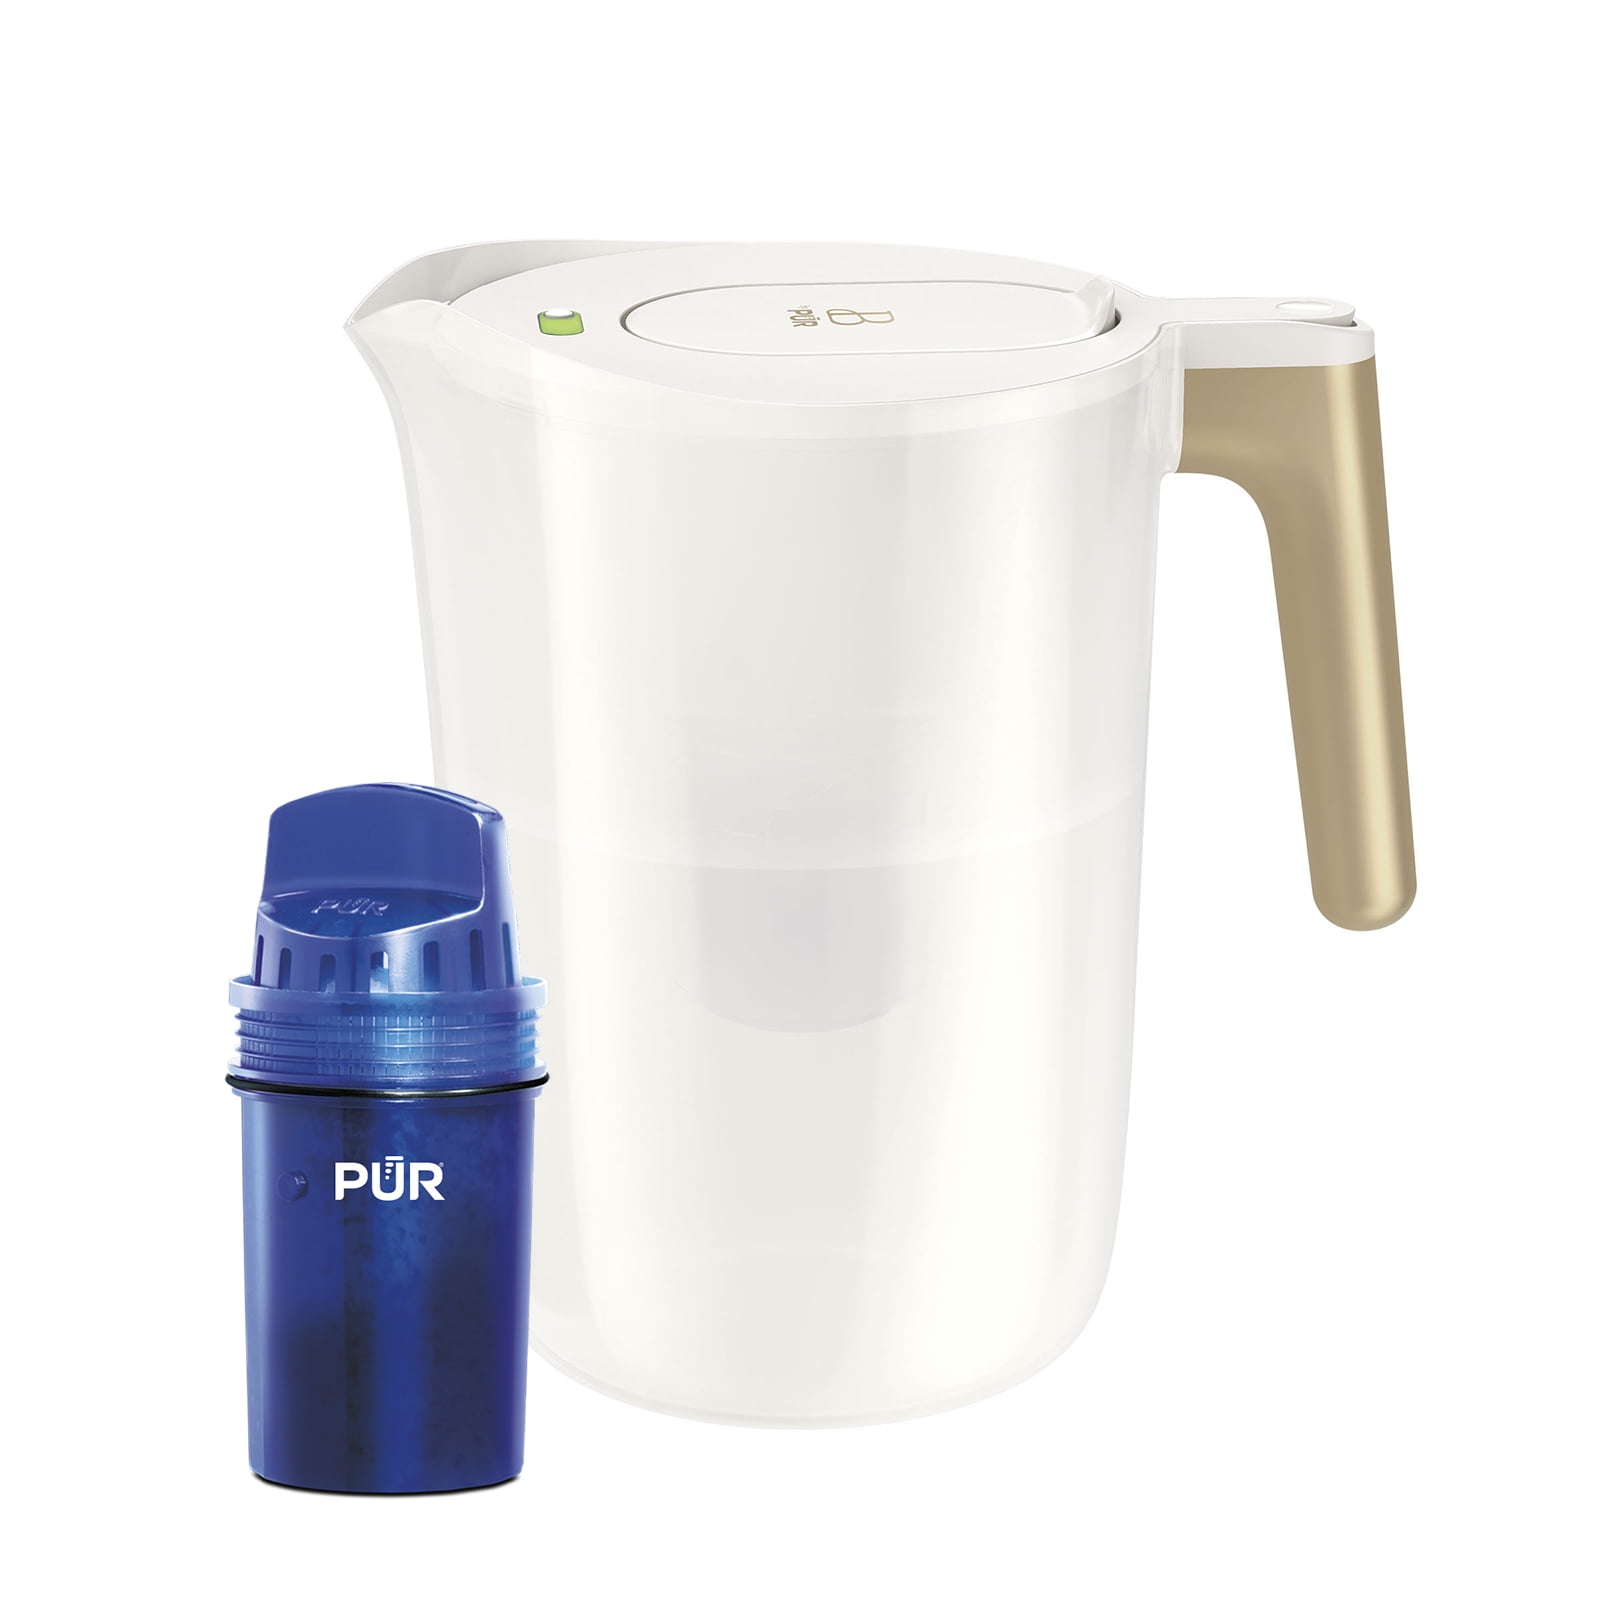 Beautiful by PUR 12 Cup Water Filtration Pitcher, W 10.2" x H 10.6" x L 6.8", White Icing (PPT120W) - Walmart.com